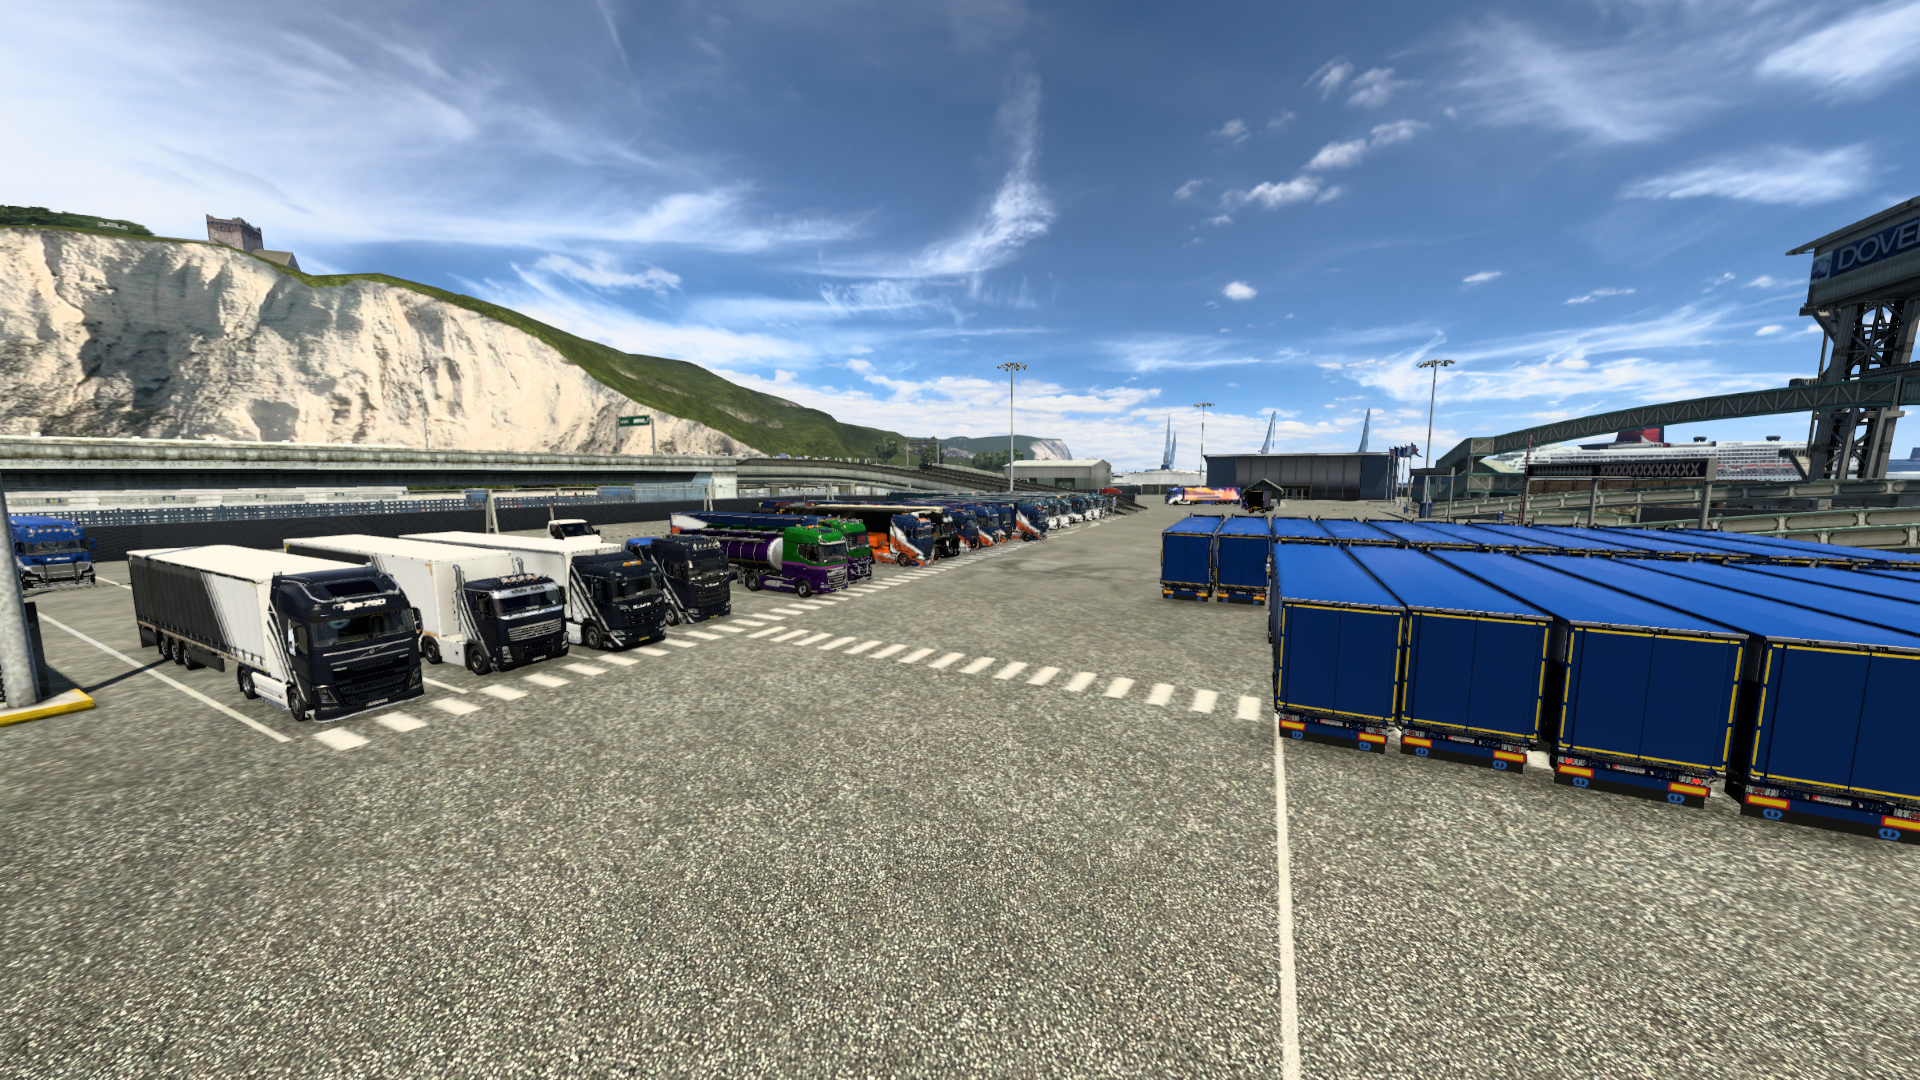 ets2_20210822_212043_00.png